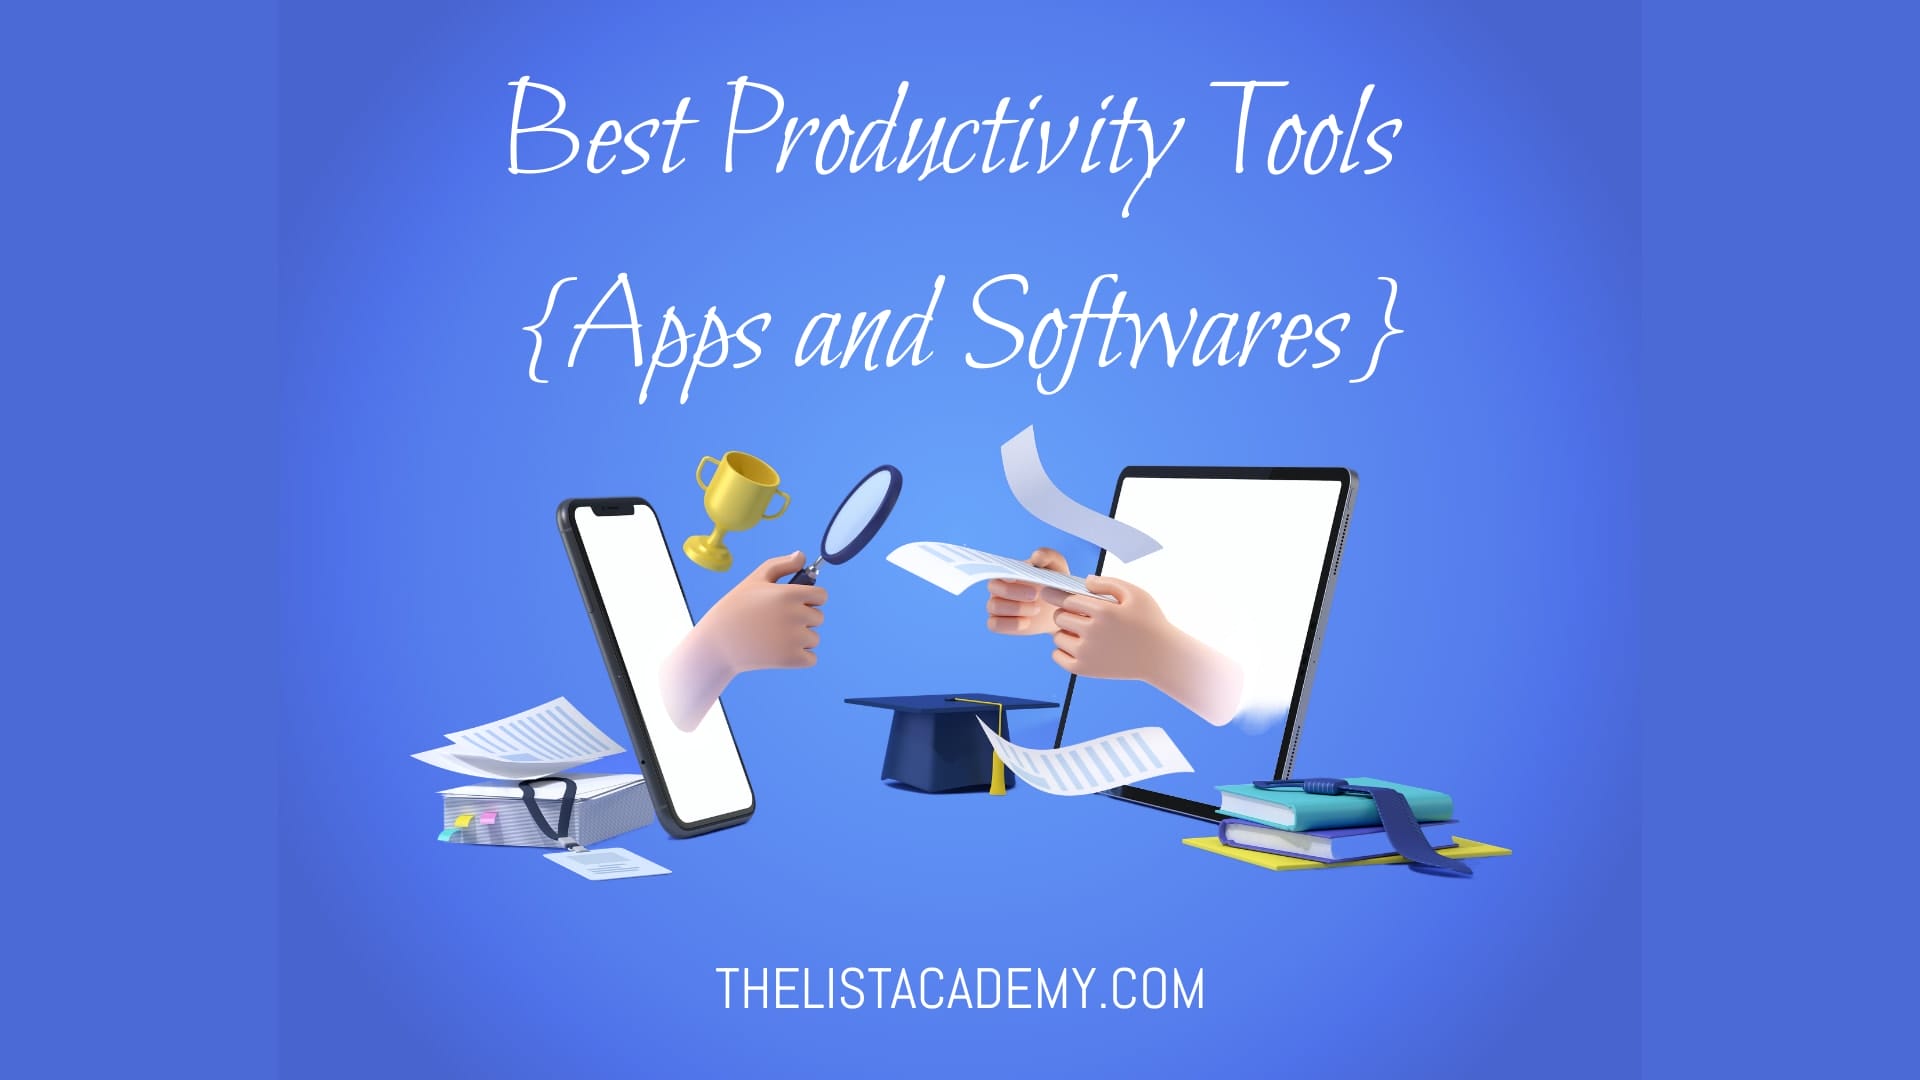 Cover Image For List : 97 Productivity Tools - List Of Best Productivity Apps And Softwares